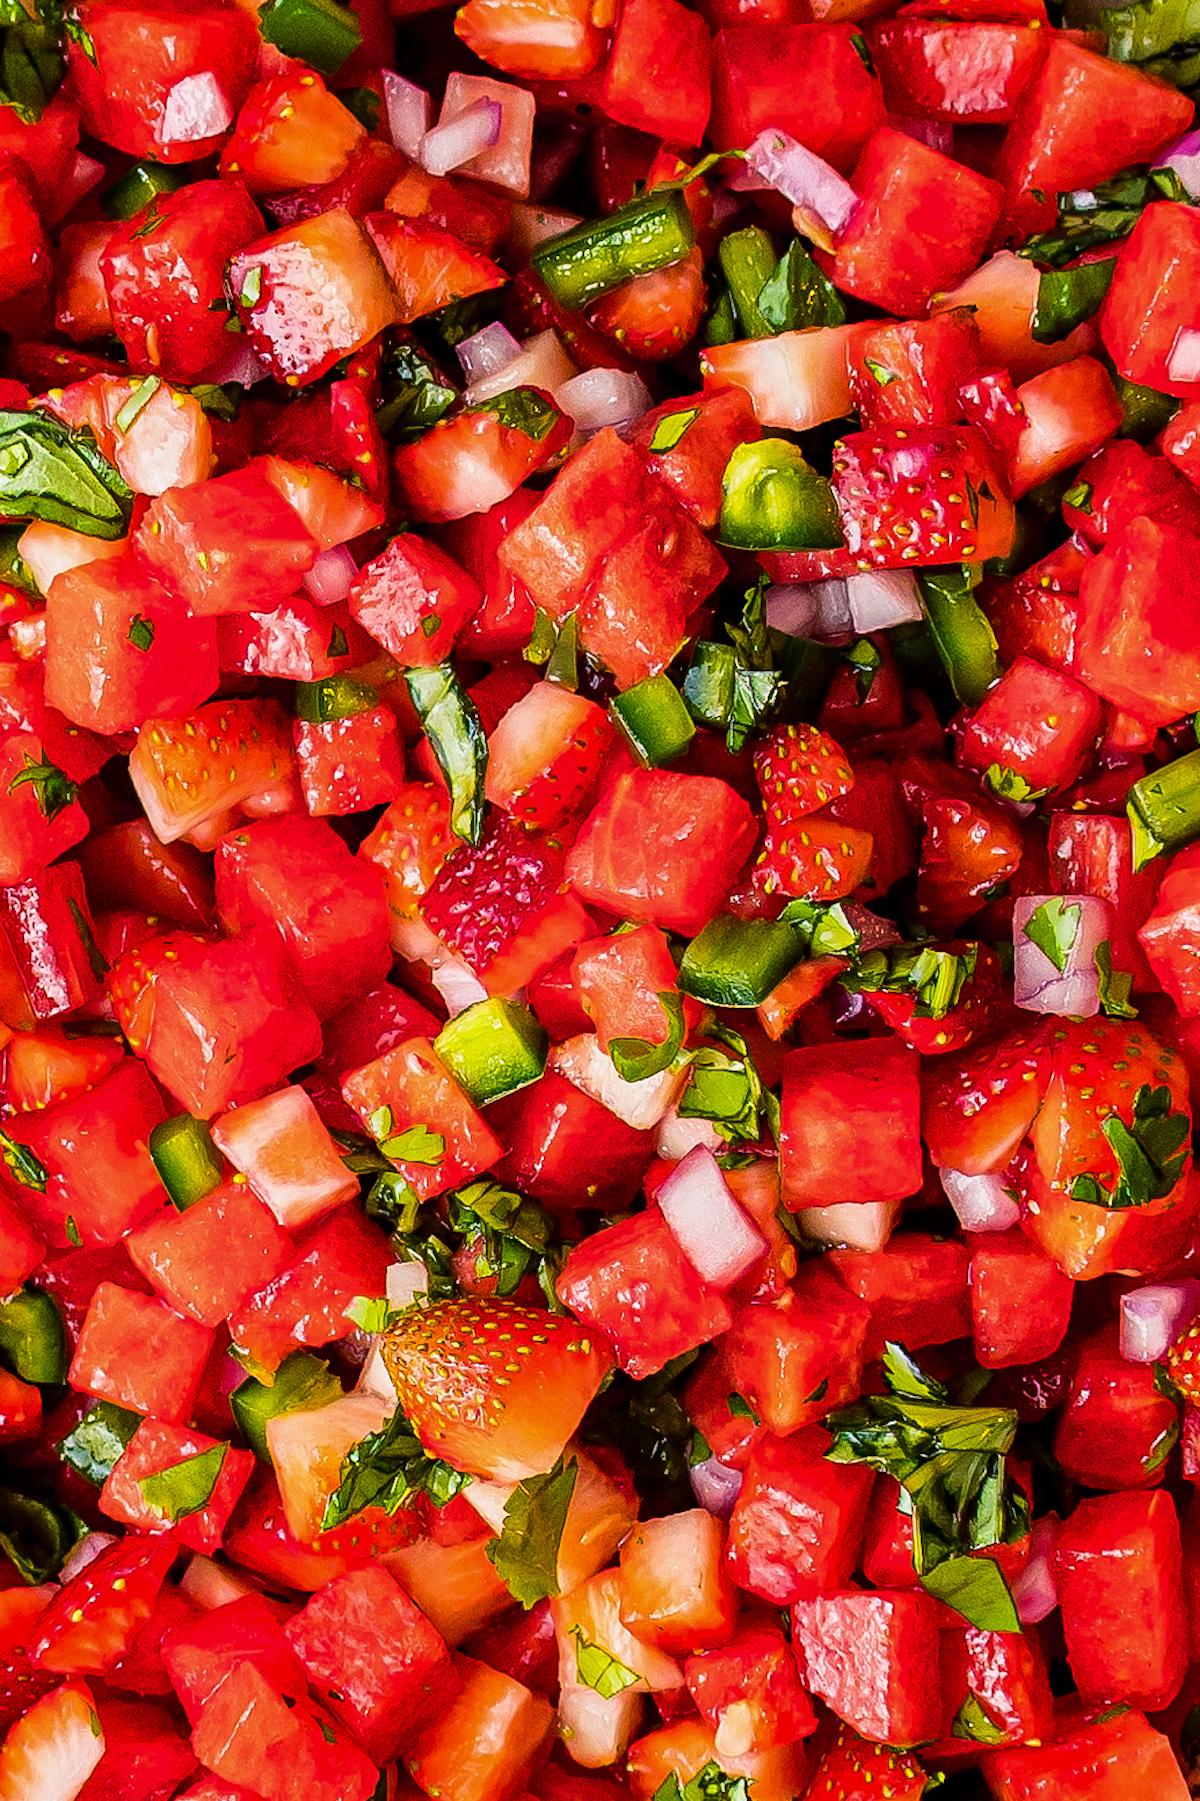 Close-up shot of fruit salsa, showing the texture of the watermelon, strawberries, and other ingredients.